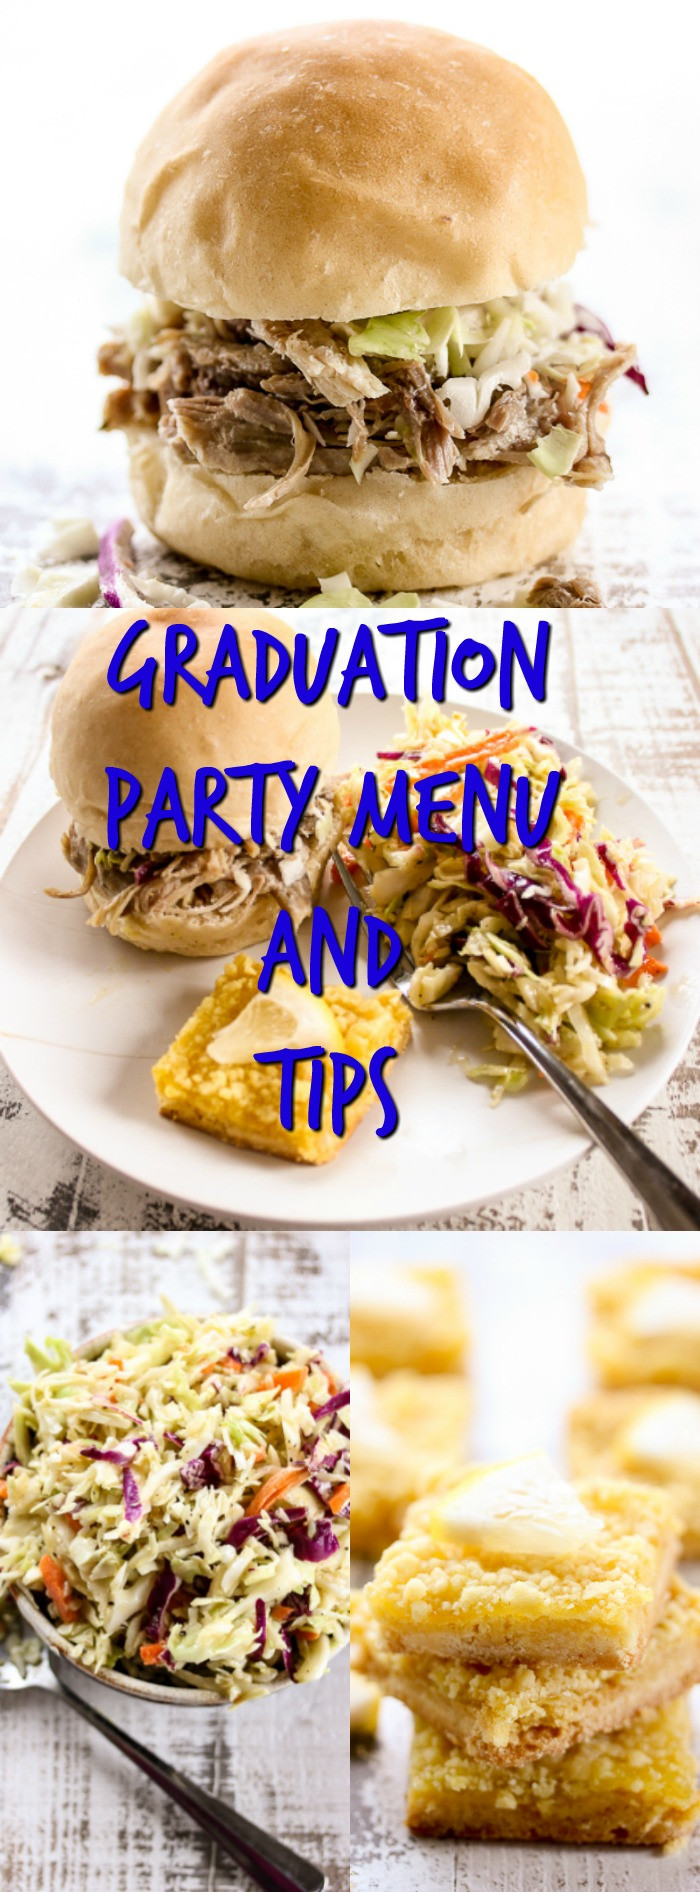 College Graduation Party Food Ideas
 Graduation Party Menu and Tips Lisa s Dinnertime Dish